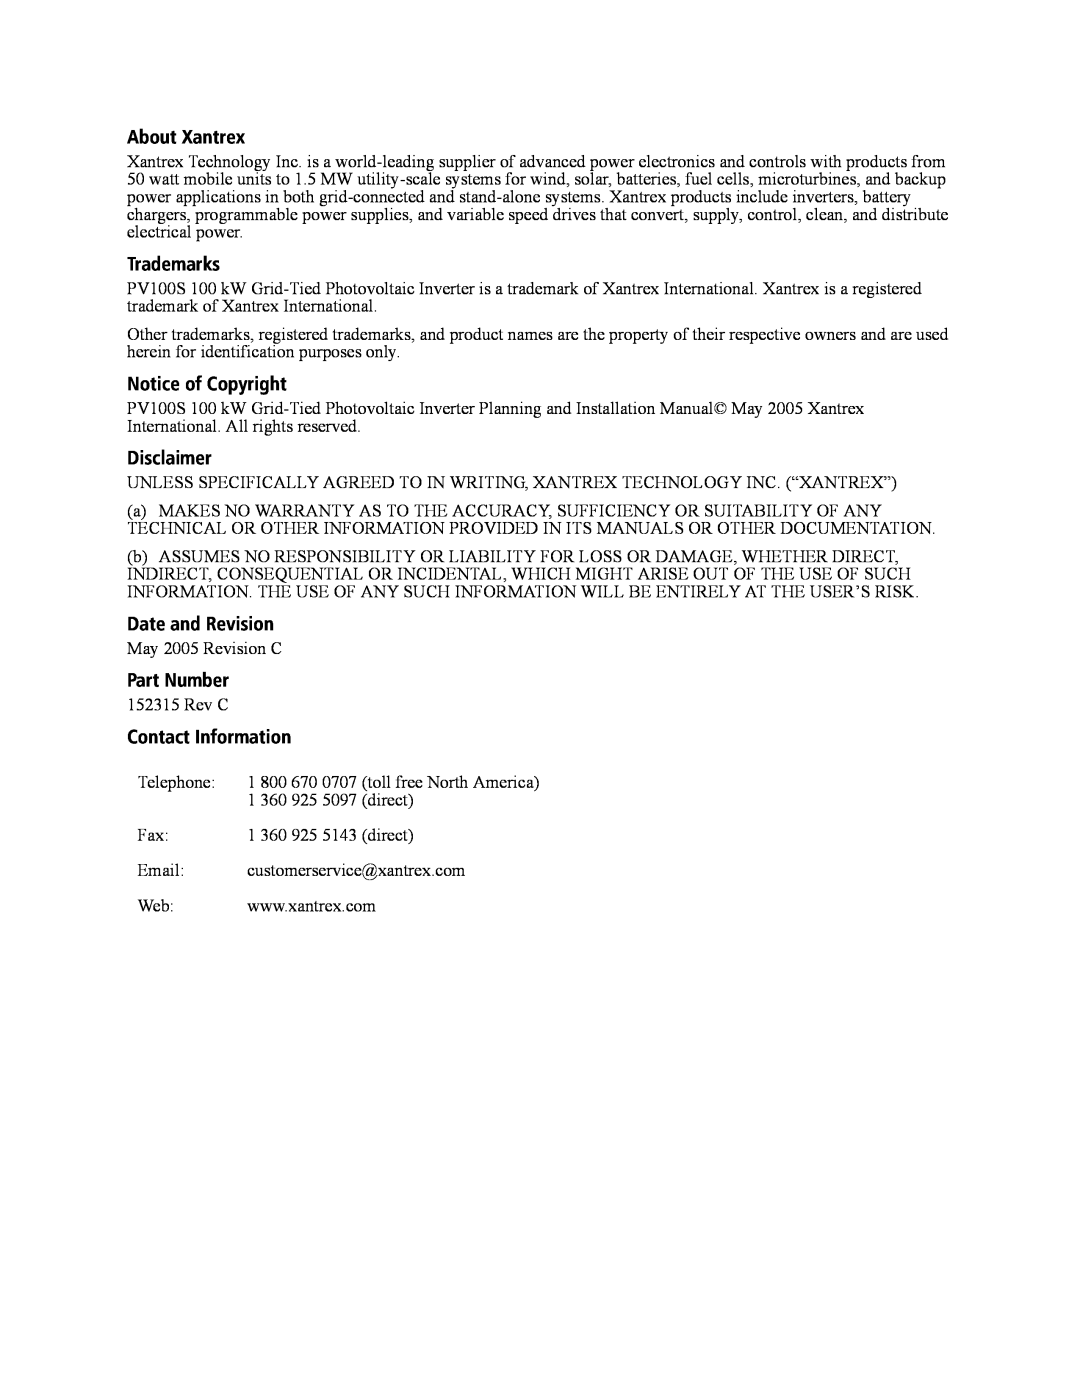 Xantrex Technology PV100S-480 About Xantrex, Trademarks, Notice of Copyright, Disclaimer, Date and Revision, Part Number 